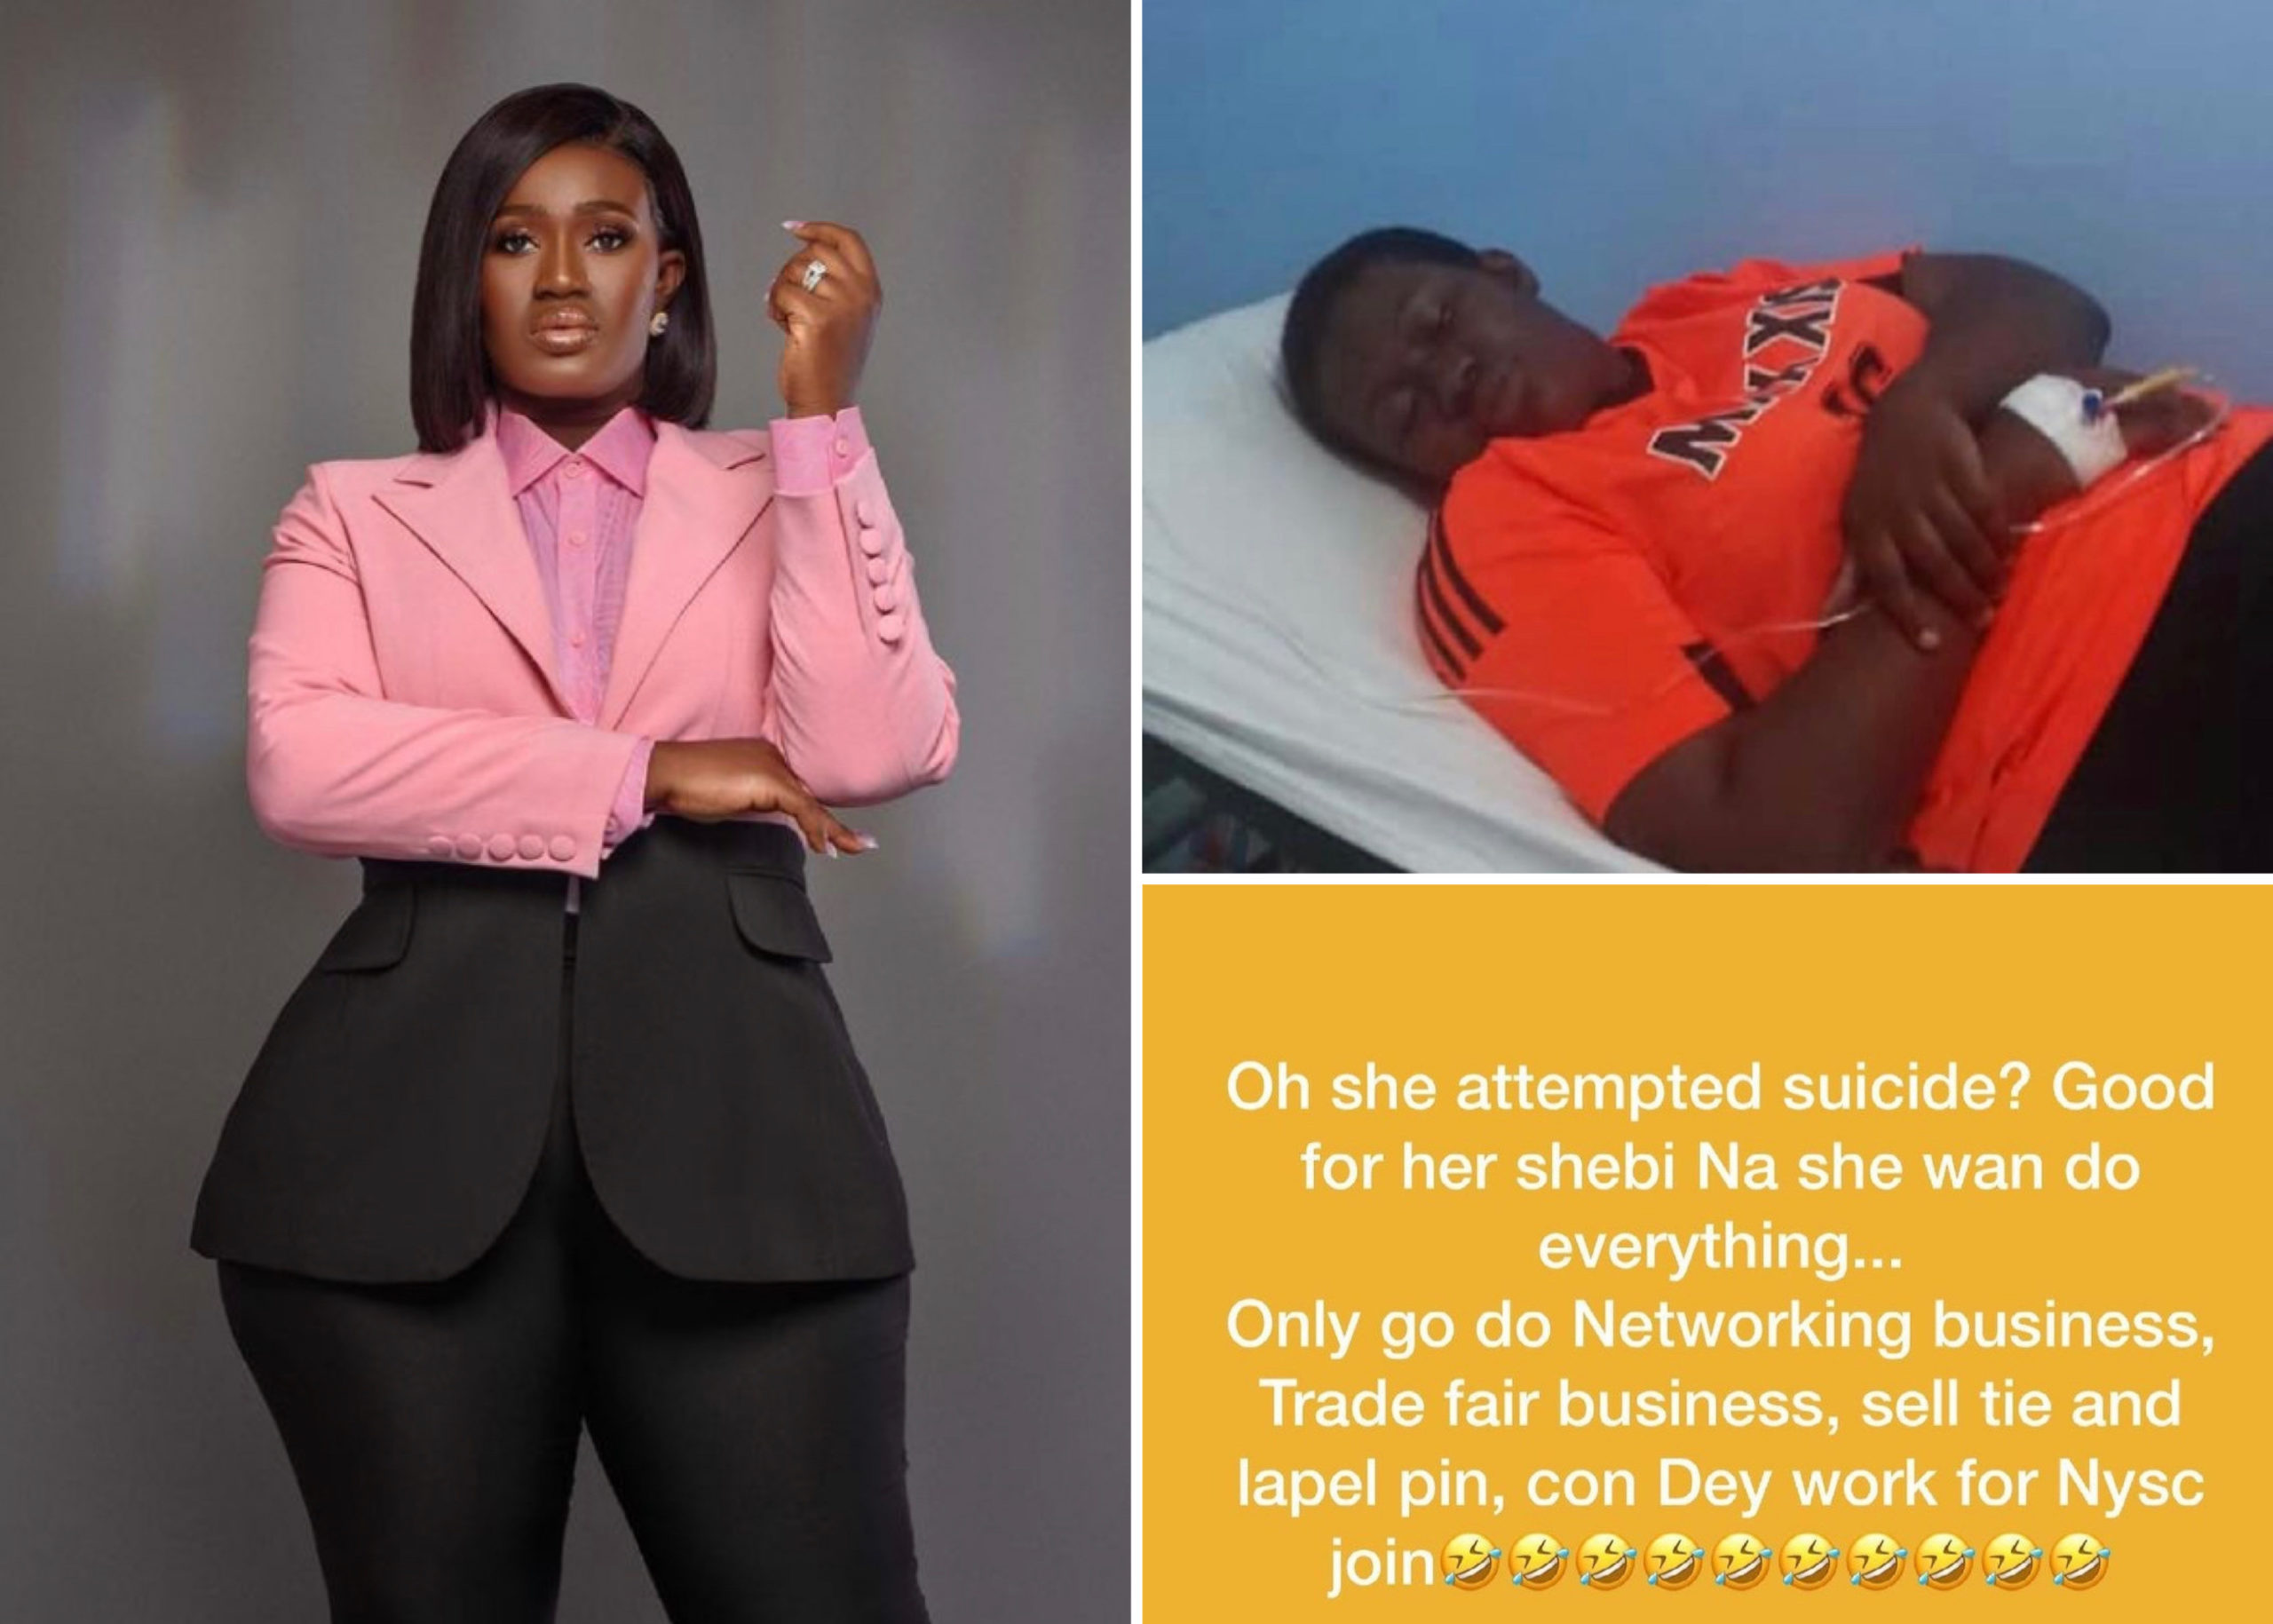 Comedian, Real Warri Pikin Reveals She Attempted Suicide Over Unpaid Debt, Shares Hurtful Messages Received From Creditors, Friends